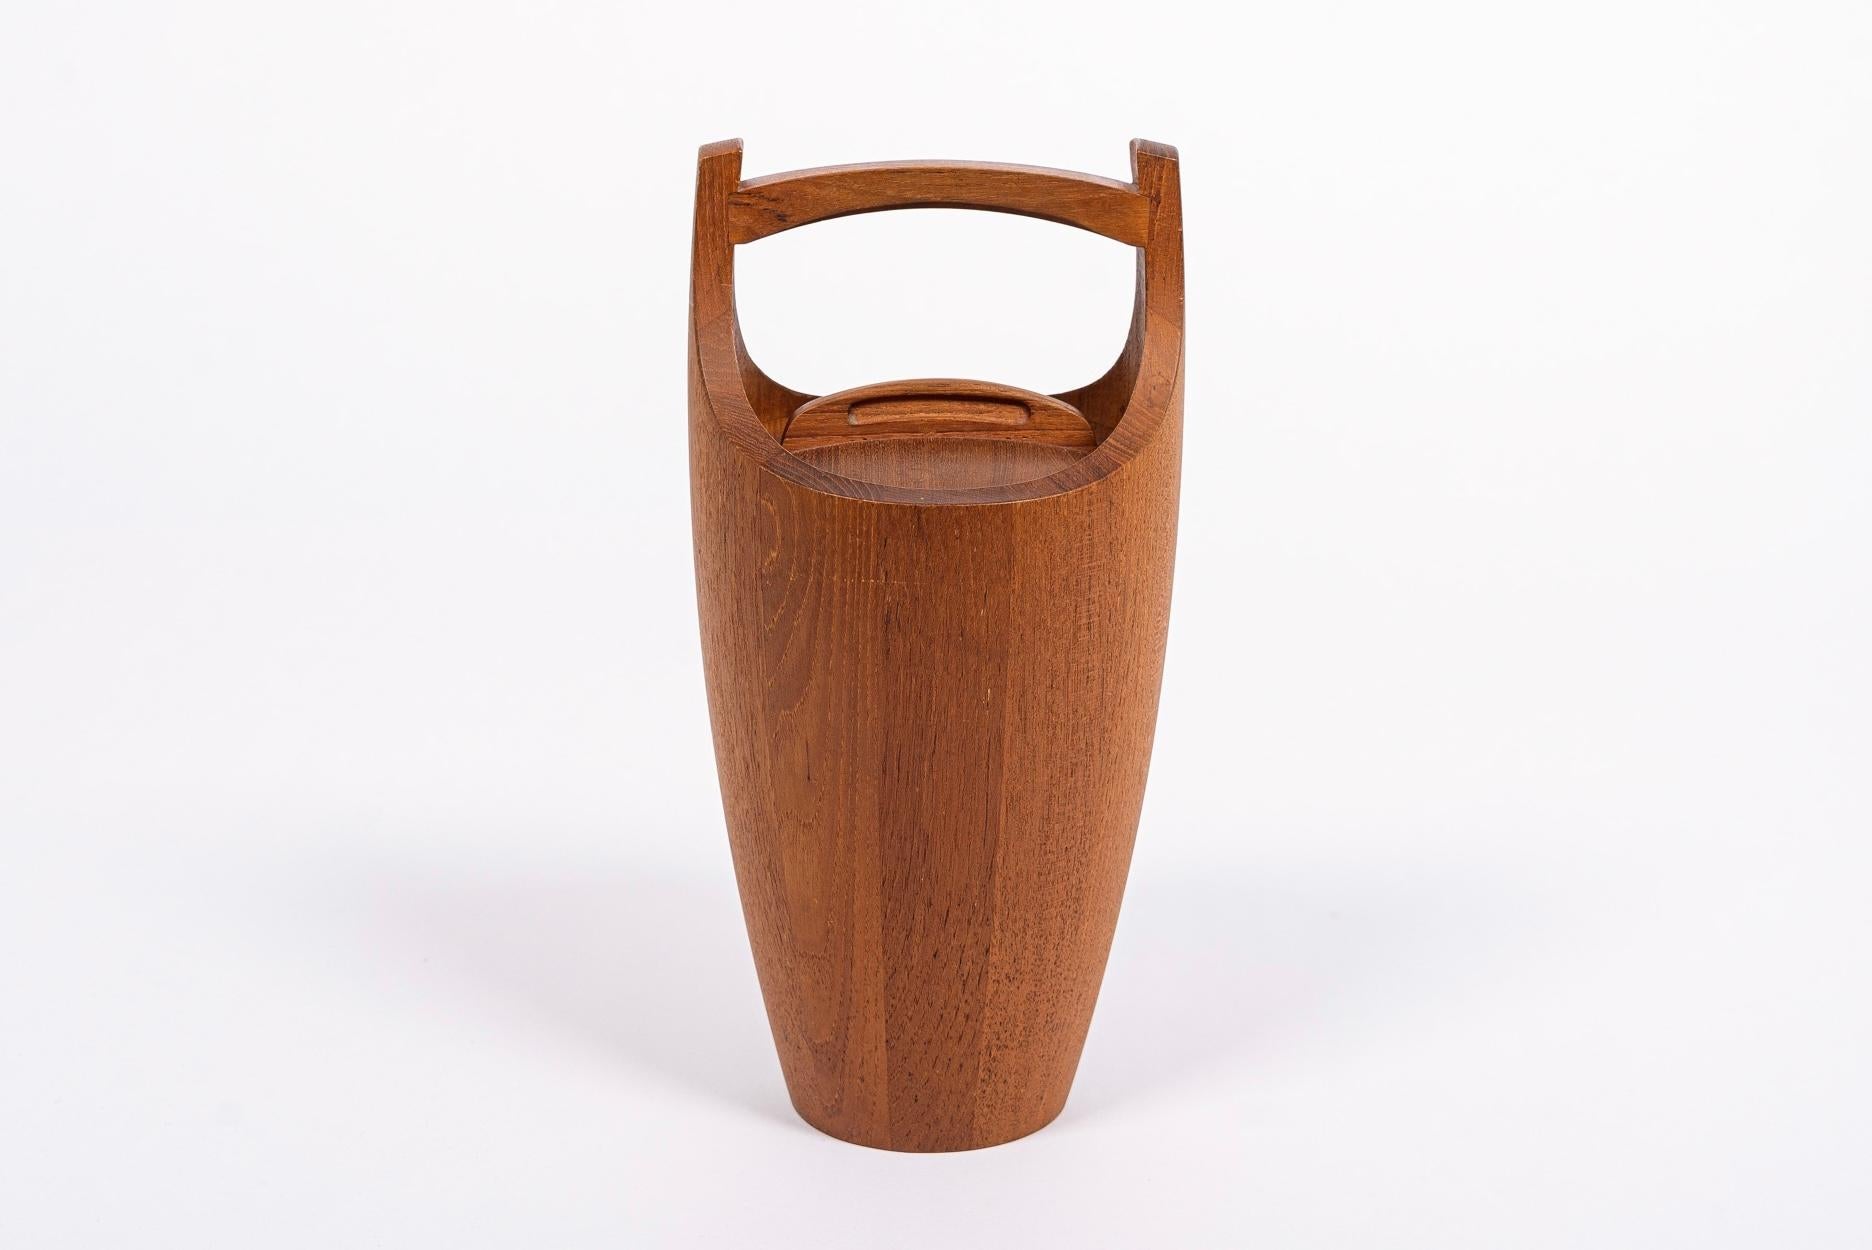 This vintage mid-century Danish modern large teak ice bucket was designed by Jens H. Quistgaard for Dansk circa 1950. This iconic piece features classic Scandinavian modern design with simple, clean lines and gentle, elegant curves. The ice bucket